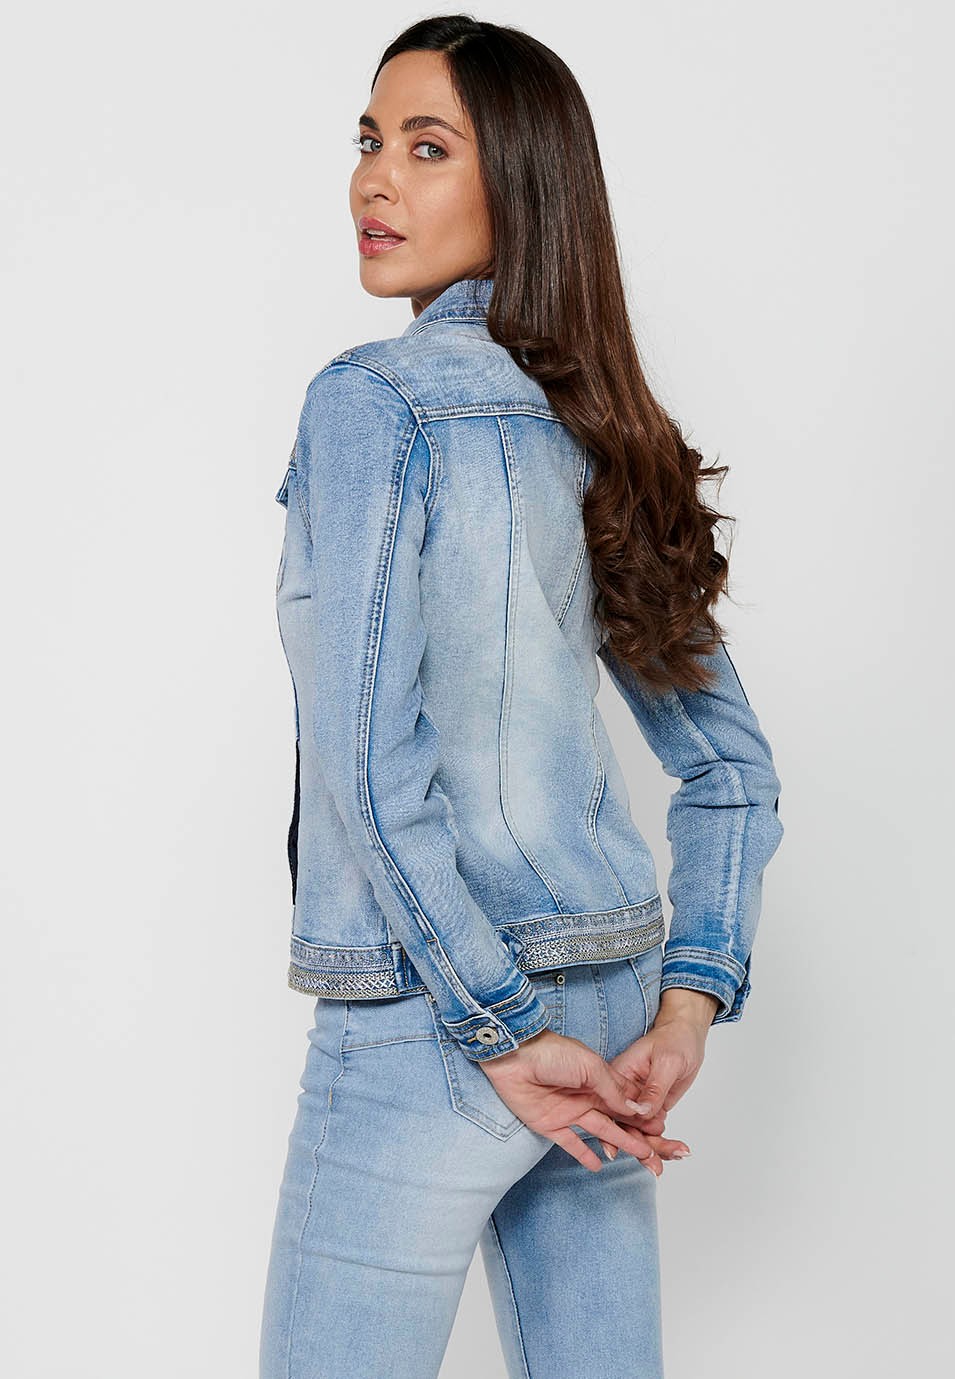 Denim jacket with front closure with buttons and shirt collar with pockets and embroidered details in light blue for women 5